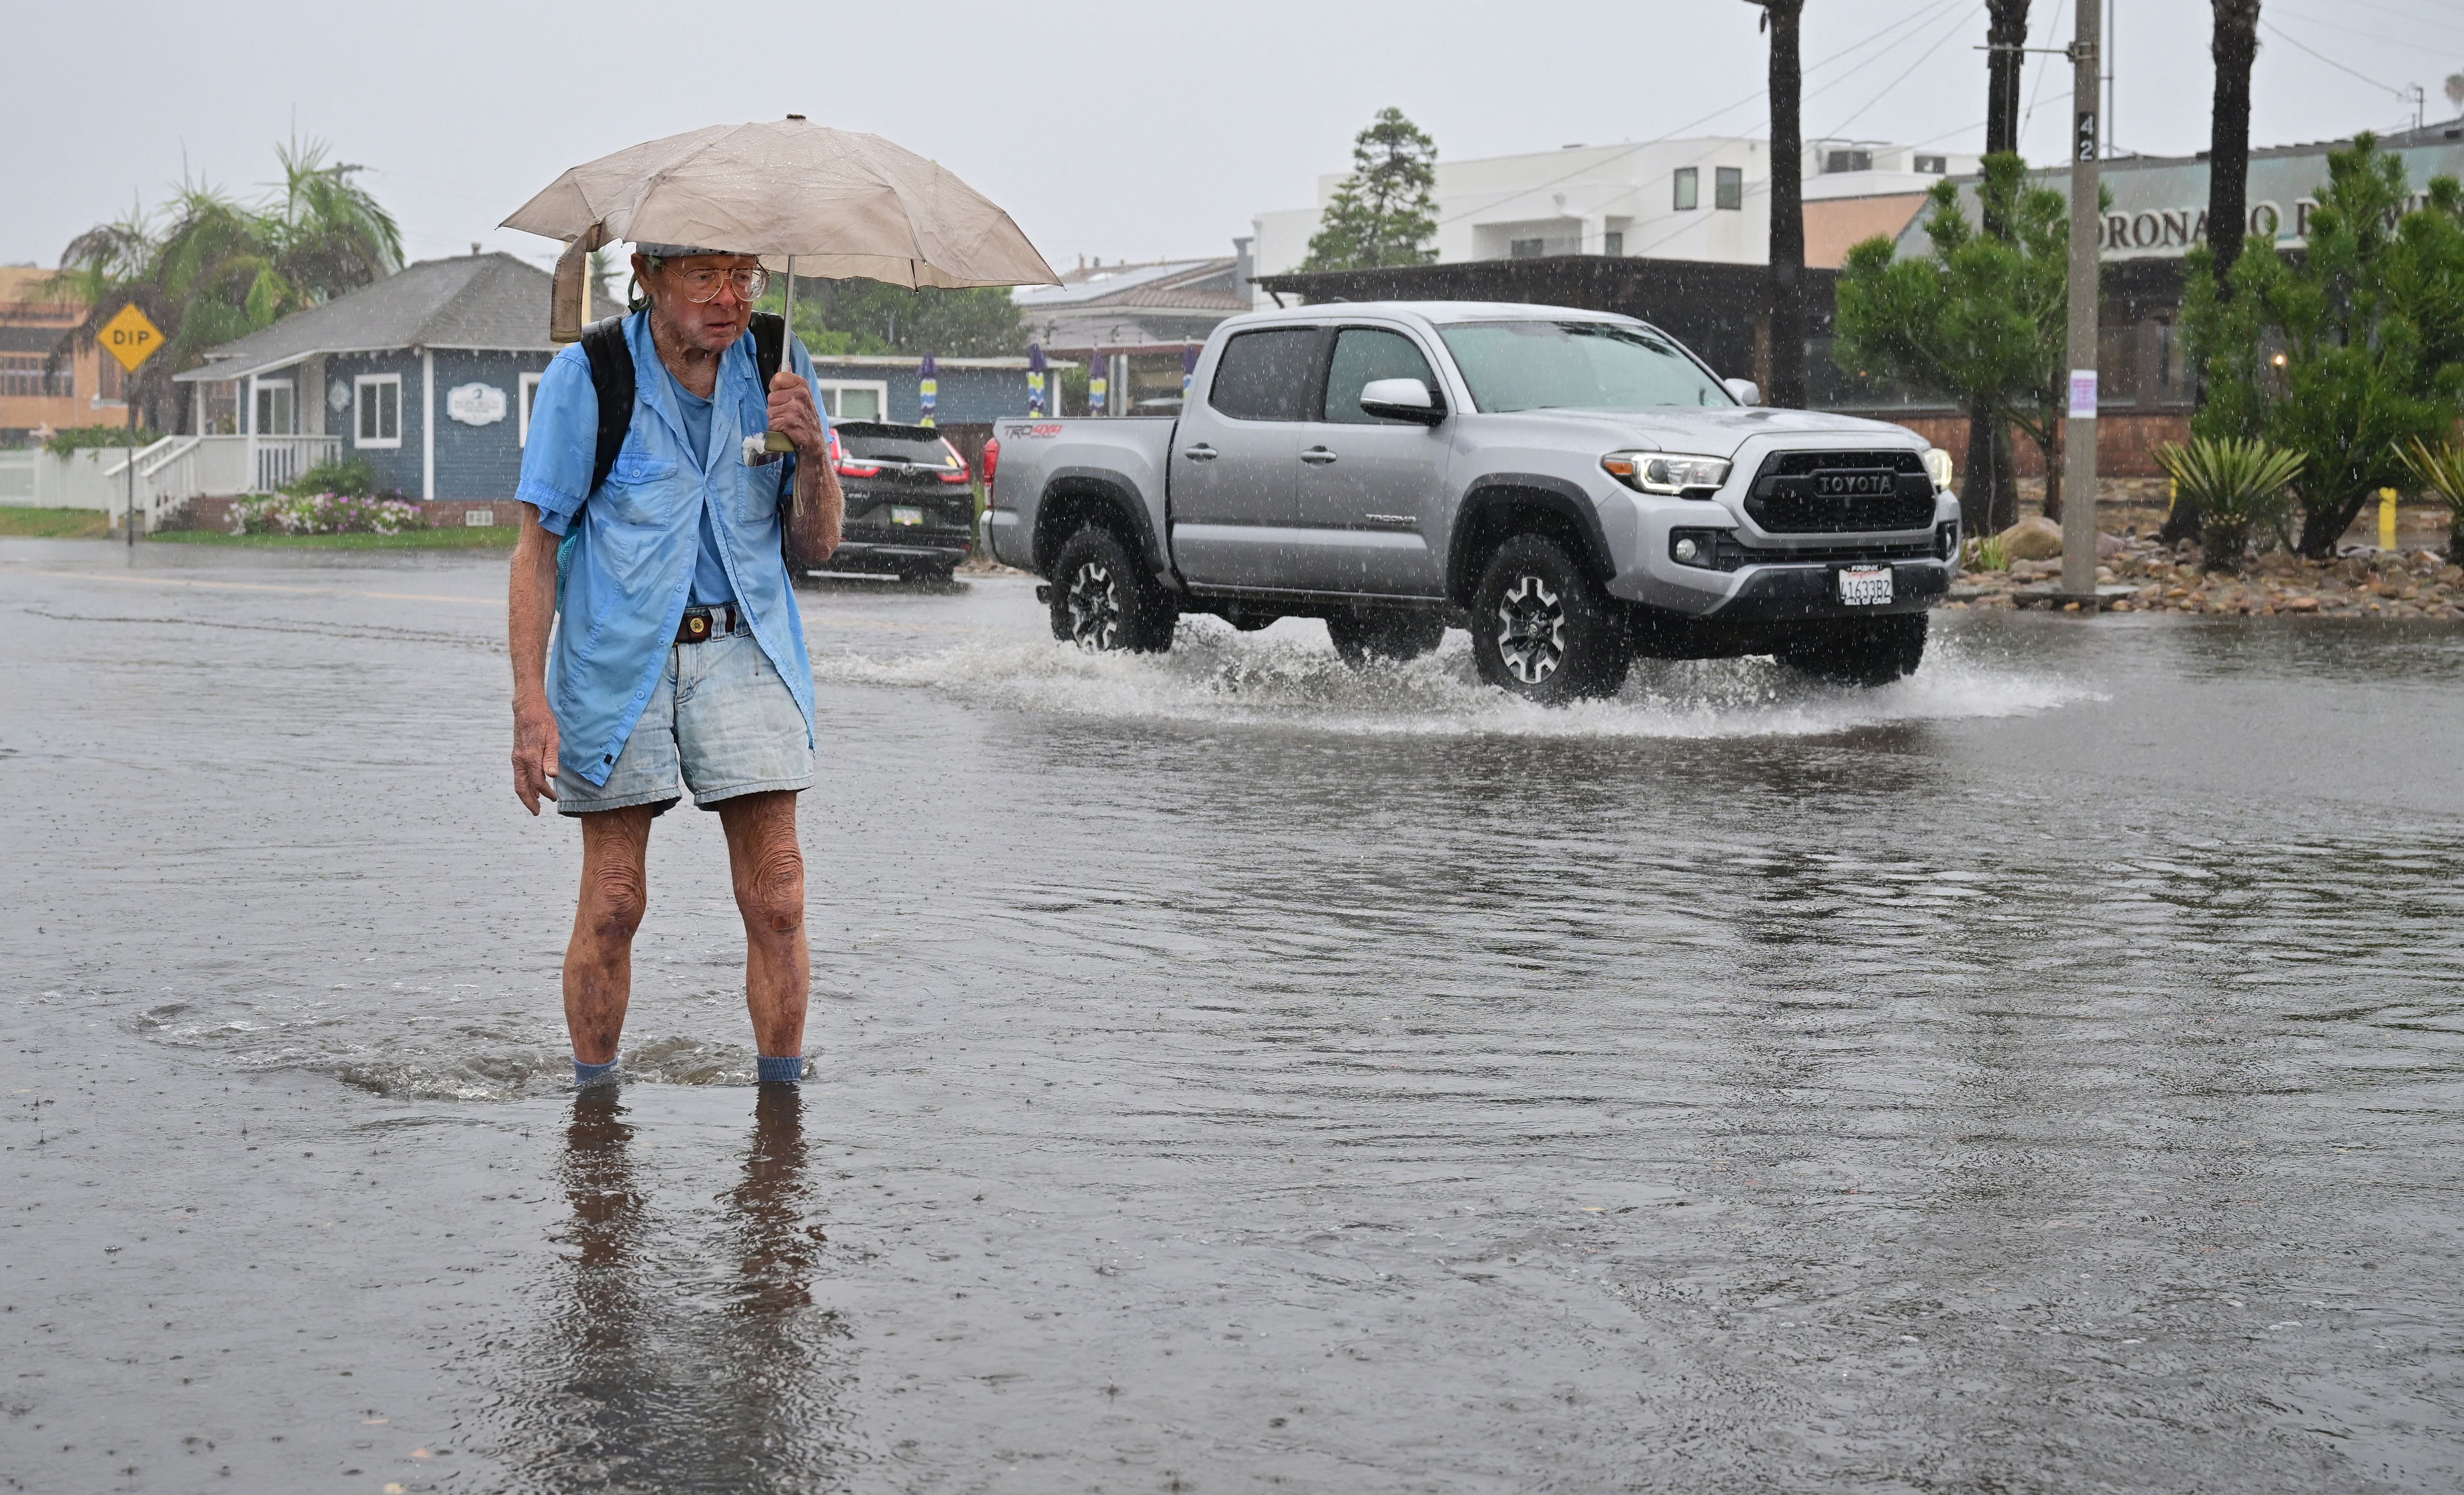 Patrick Brown holds his umbrella as he makes his way across a flooded intersection in Imperial Beach, California on August 20, 2023. Hurricane Hilary weakened to a tropical storm on August 20, 2023, as it barreled up Mexico's Pacific coast, but was still likely to bring life-threatening flooding to the typically arid southwestern United States, forecasters said. Authorities reported at least one fatality in northwestern Mexico, where Hilary lashed the Baja California Peninsula with heavy rain and strong winds